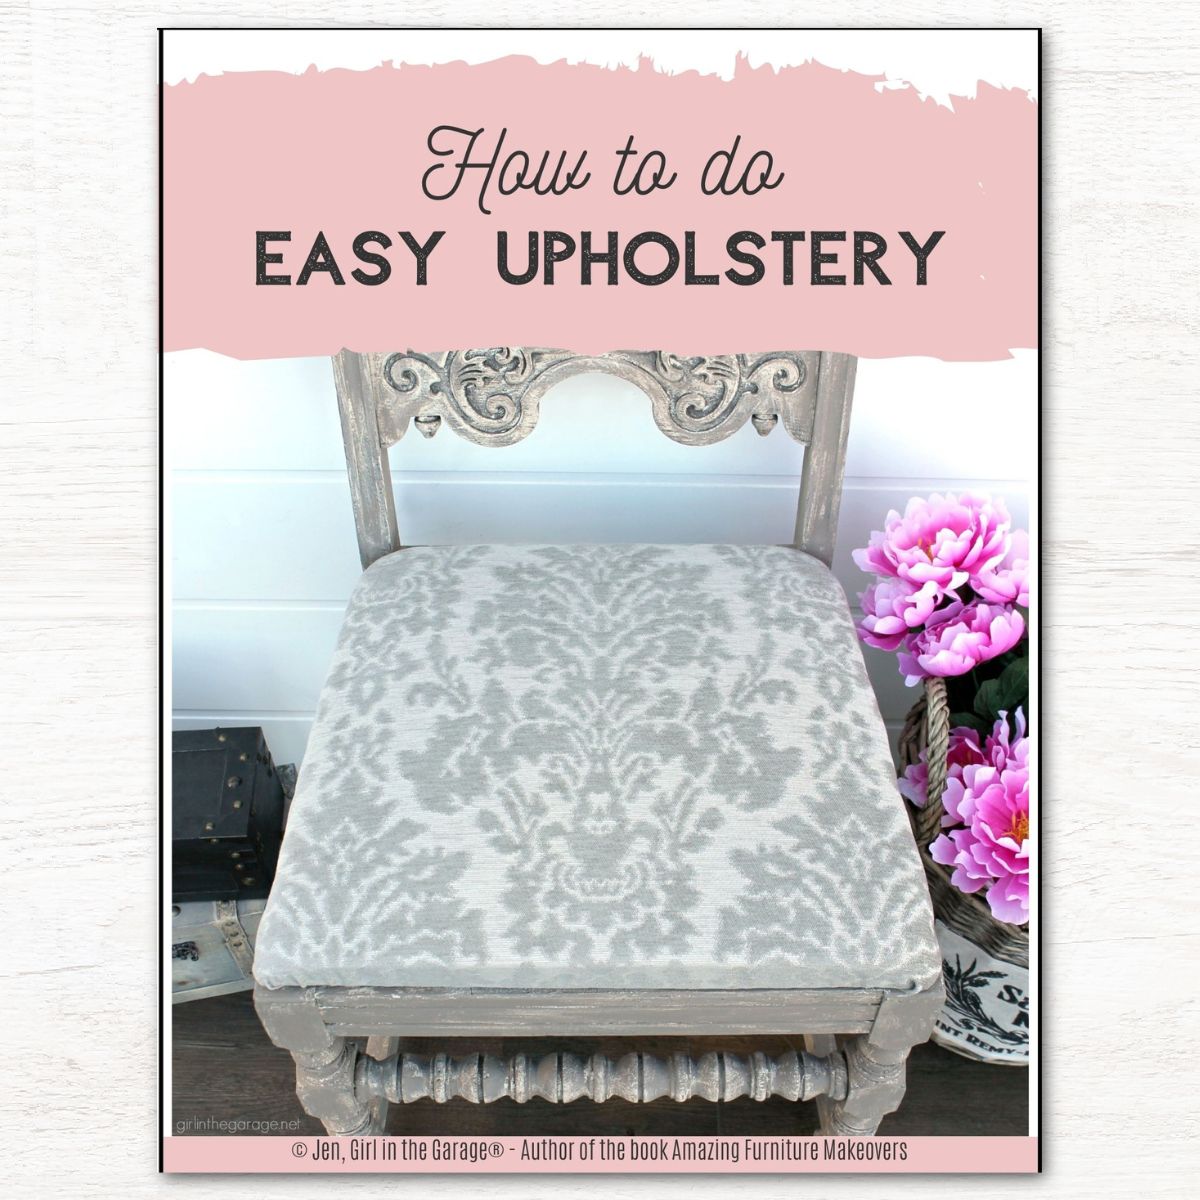 How to do Easy Upholstery